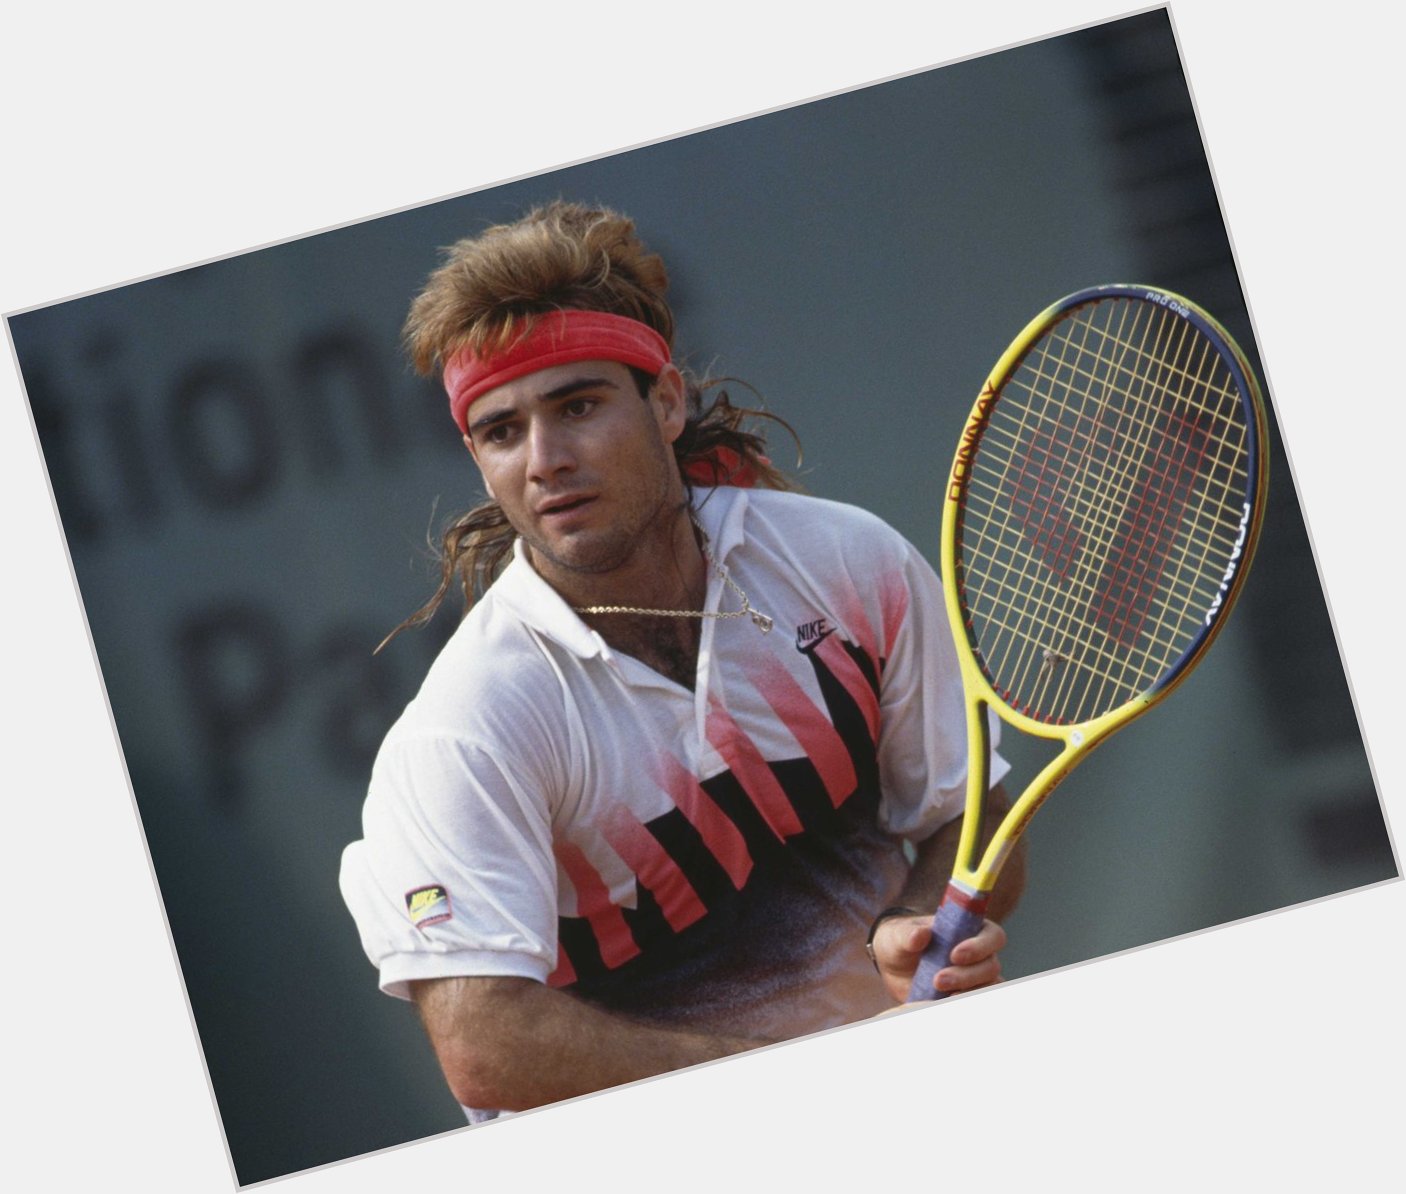 Happy Birthday to Andre Agassi who turns 47 today! 